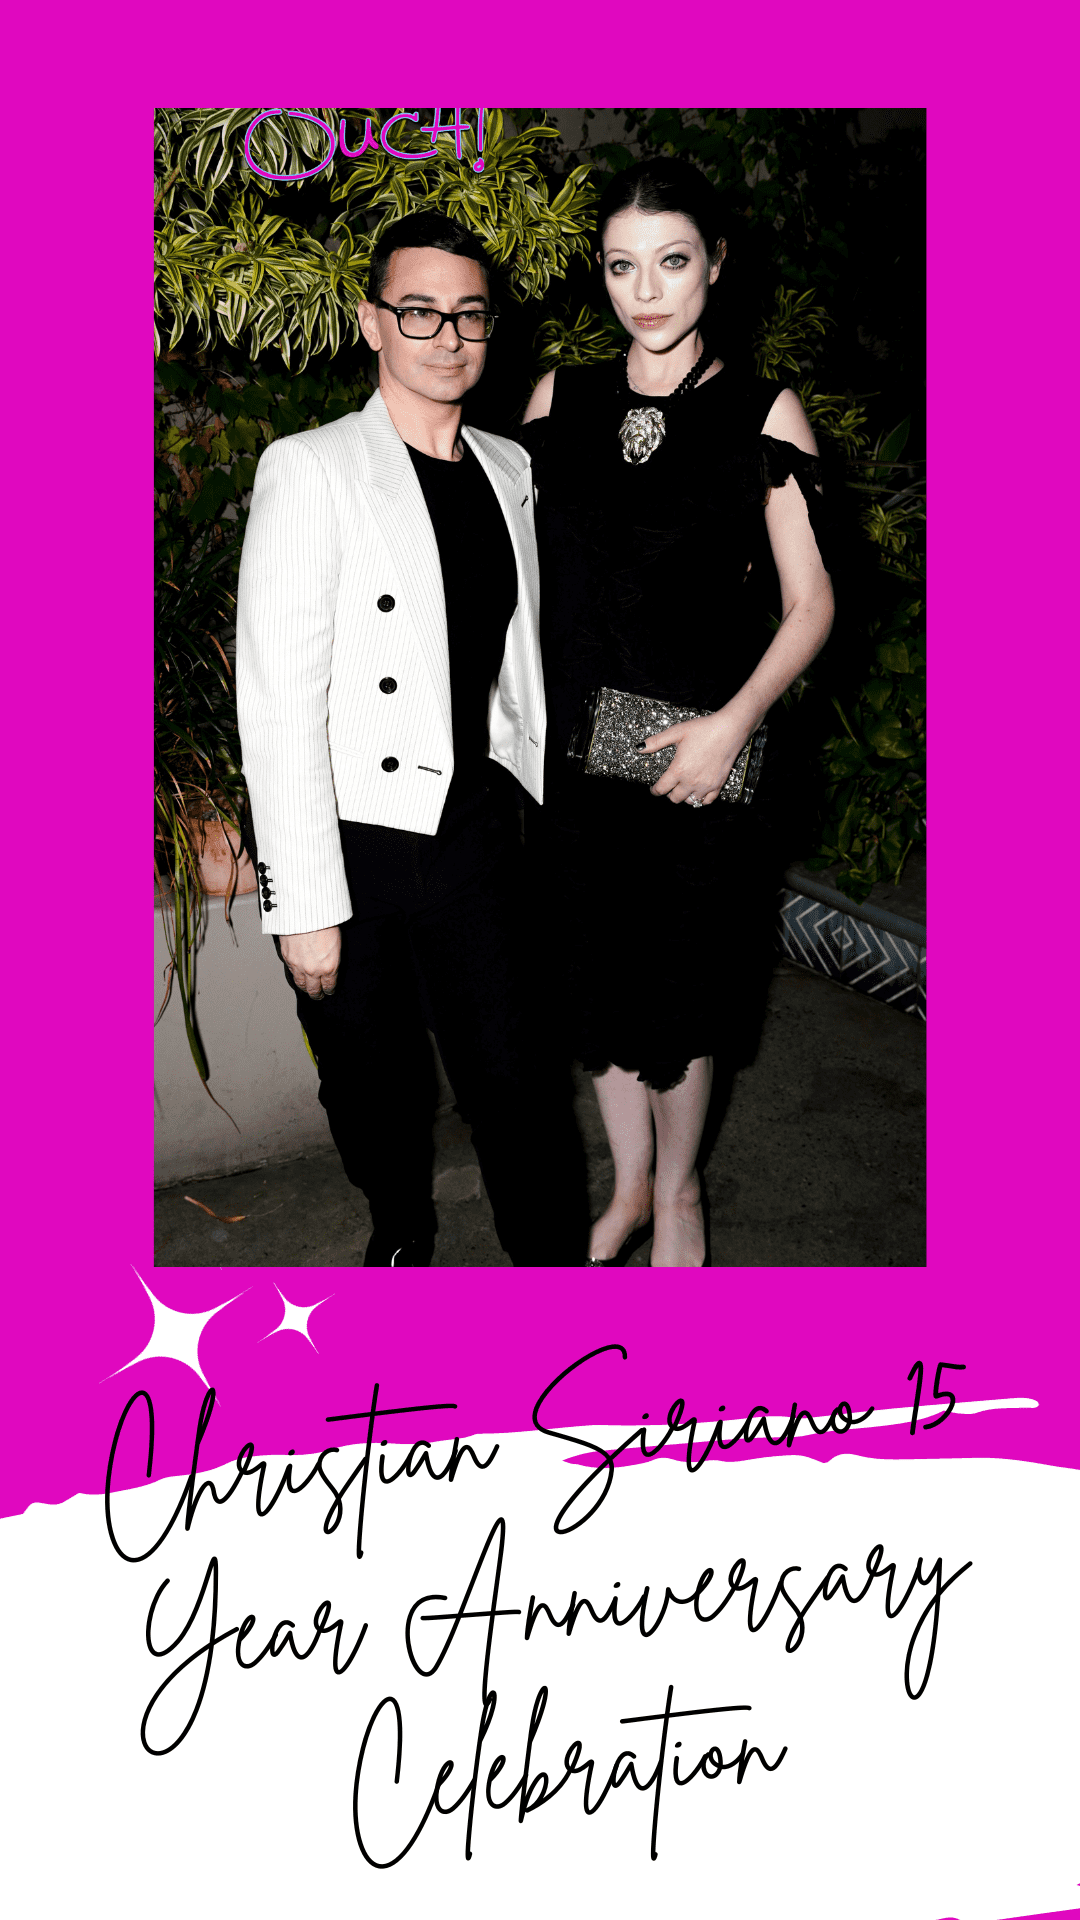 Christian Siriano and Michelle Trachtenberg attend Christian Siriano's 15 Year Anniversary Celebration at Nic's On Beverly on November 02, 2023 in Los Angeles, California. (Photo by Presley Ann/Getty Images for Christian Siriano)